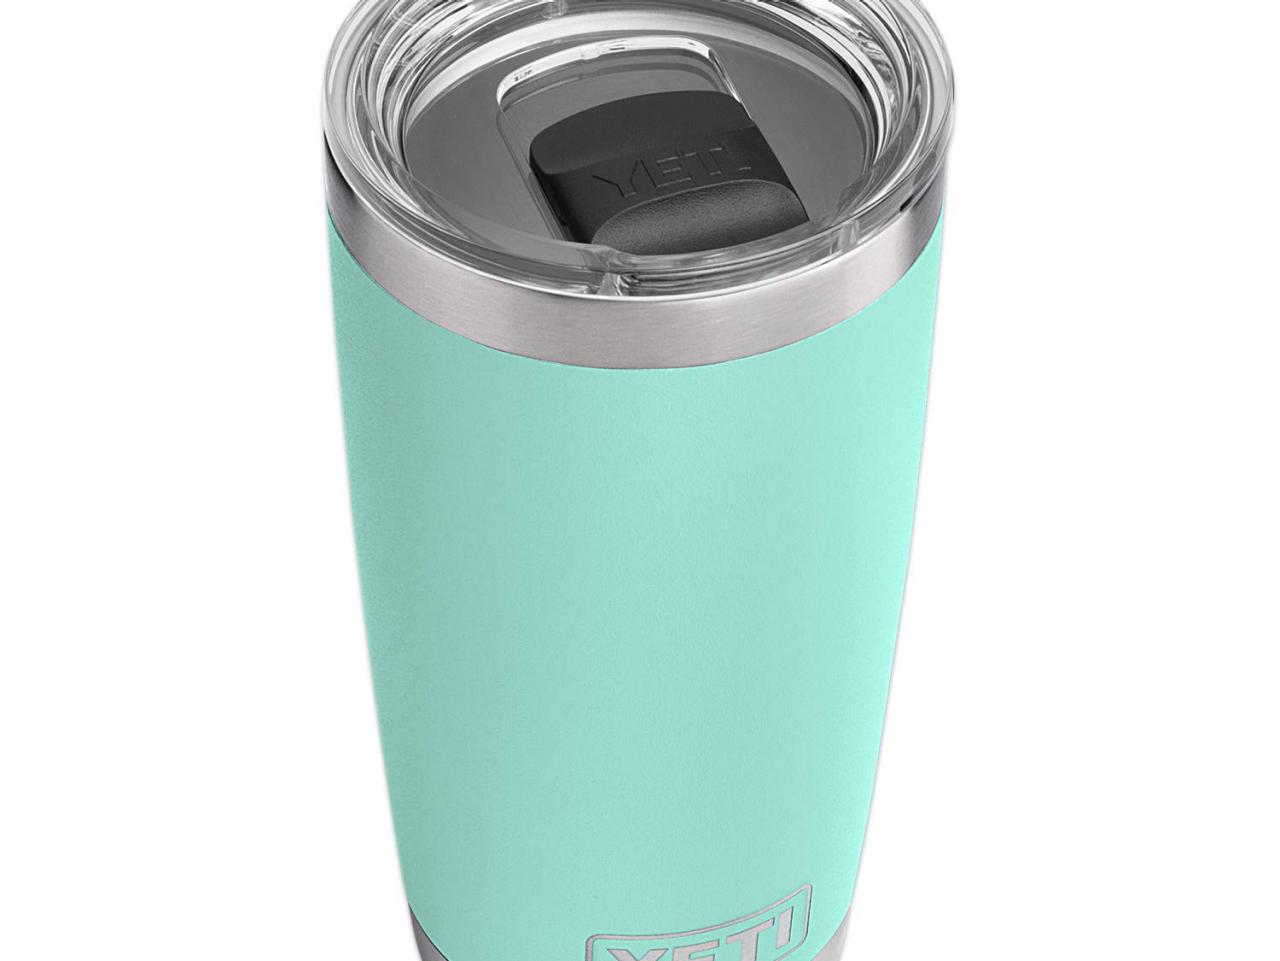 https://food.fnr.sndimg.com/content/dam/images/food/products/2019/6/17/rx_yeti-rambler-20-oz-stainless-steel-tumbler.jpeg.rend.hgtvcom.1280.960.suffix/1560785825746.jpeg